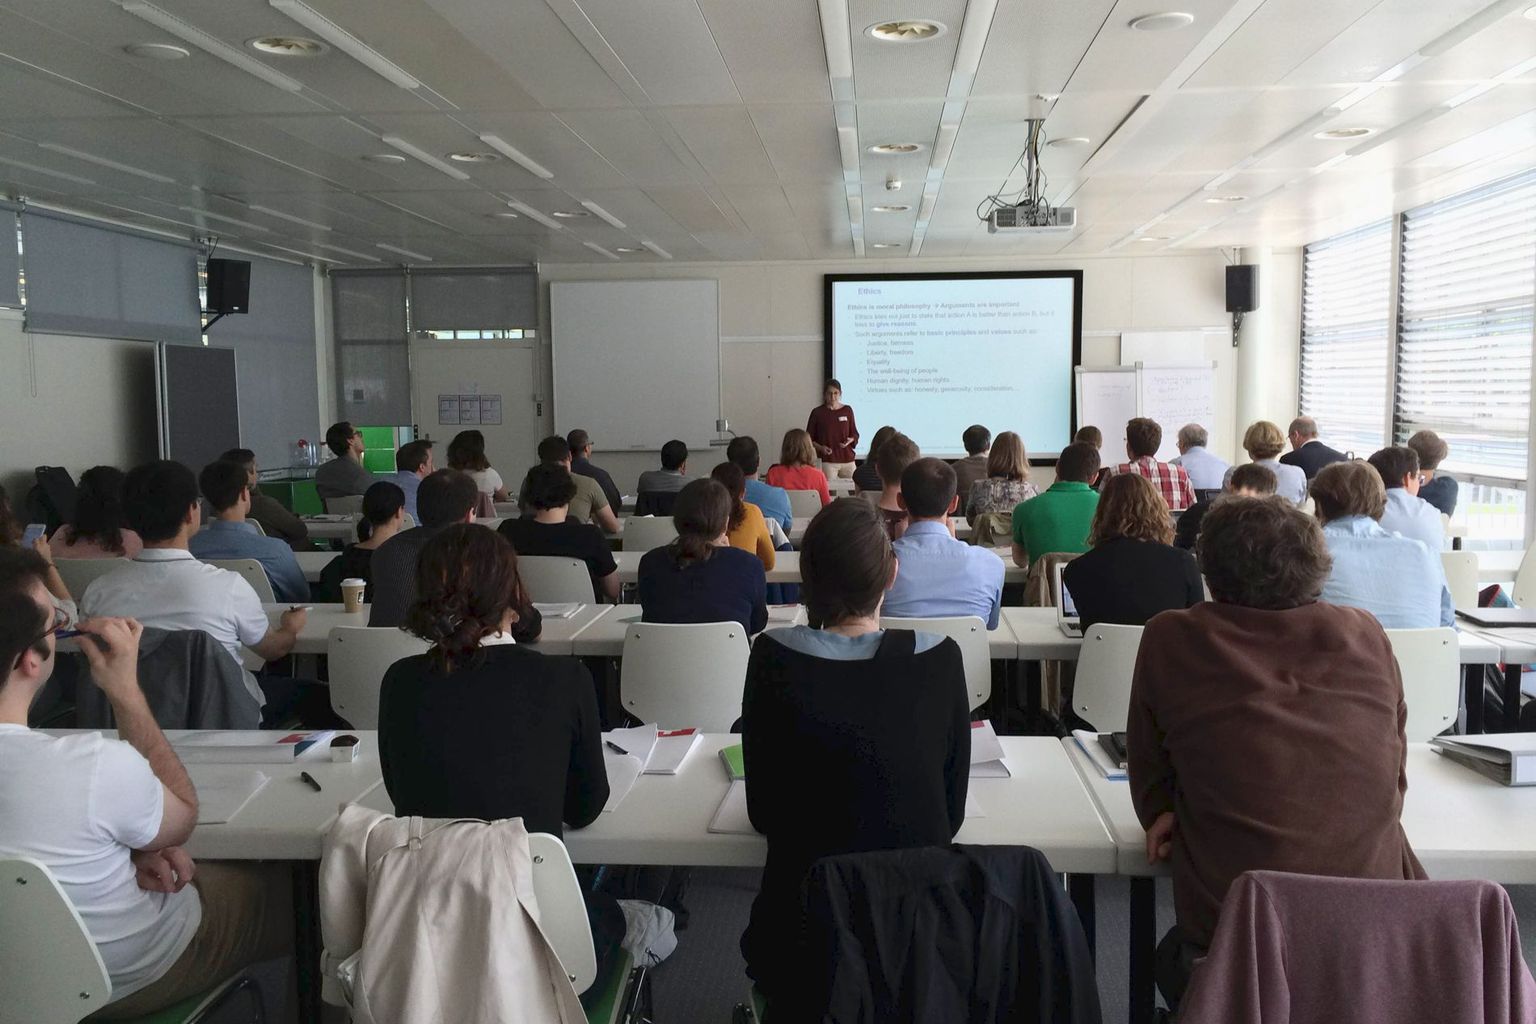 Over 40 PhD students and postdocs attended the course.